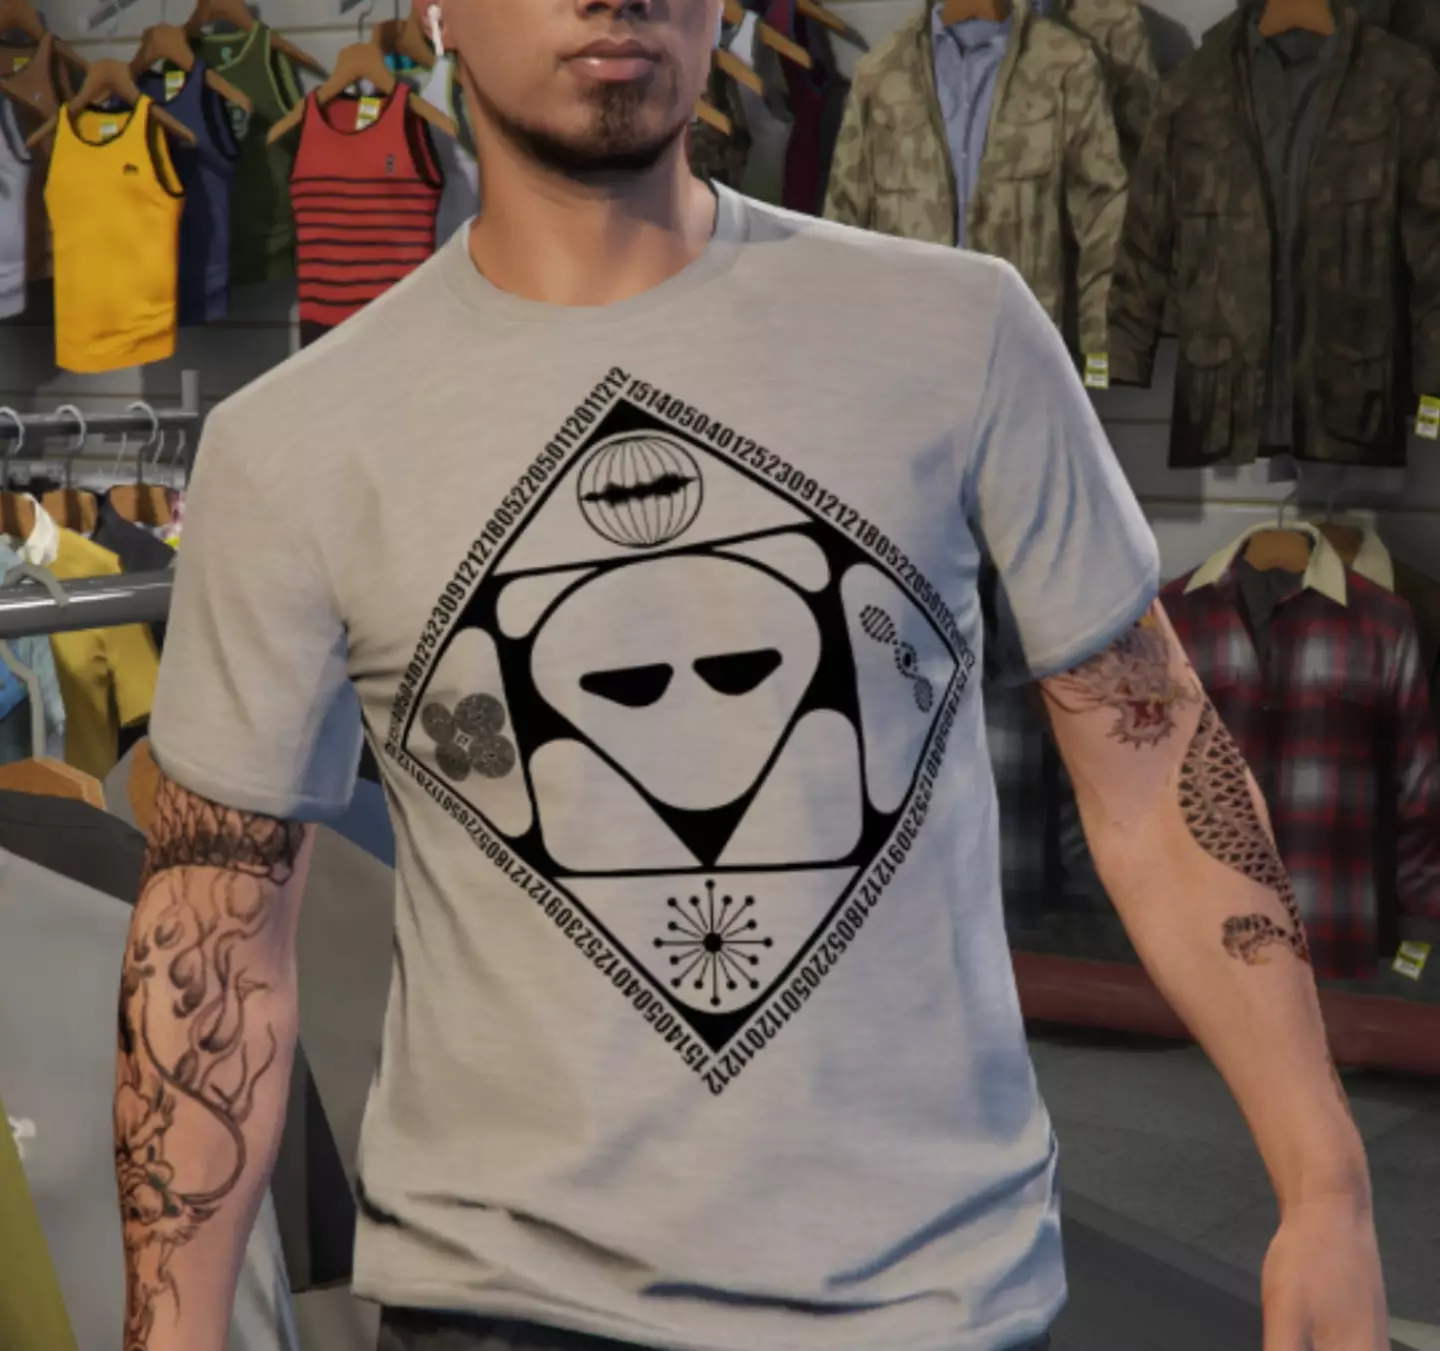 Fans have speculated the shirt could be teasing GTA VI's release date, too.